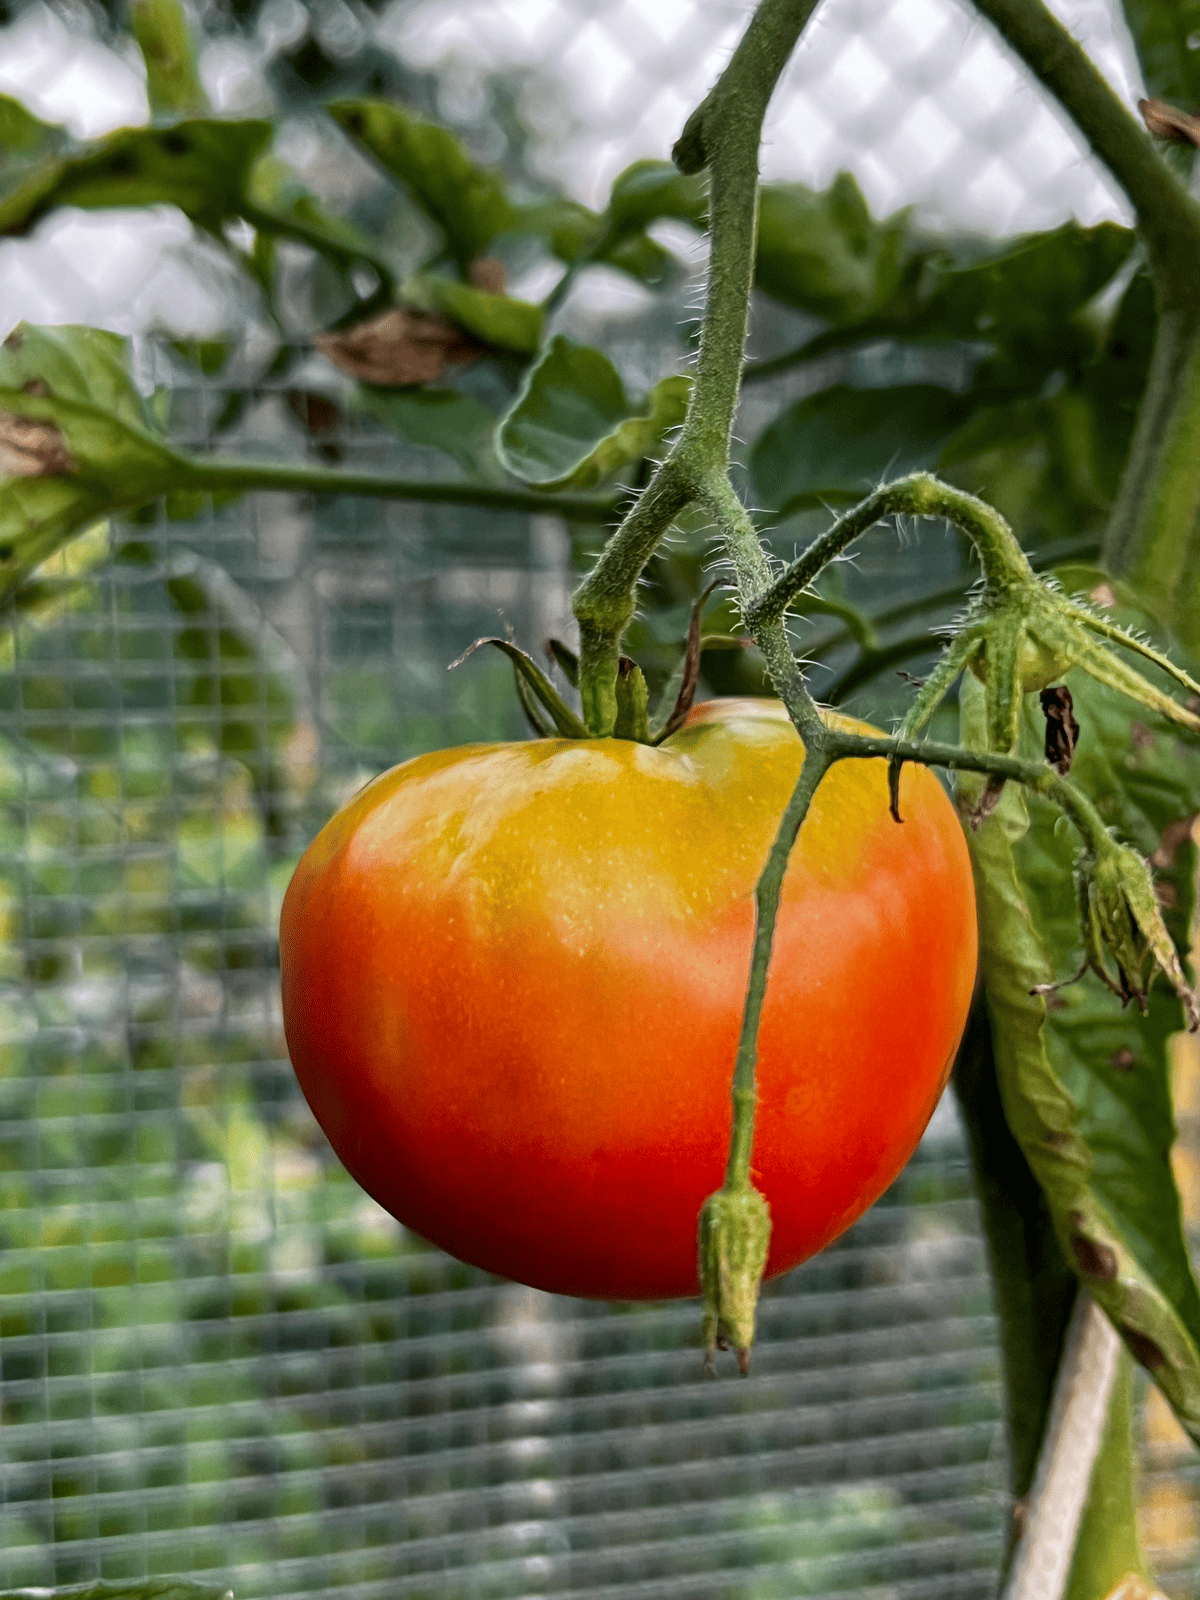 Black from Tula tomato which isn't nearly as black as I expected it to be.